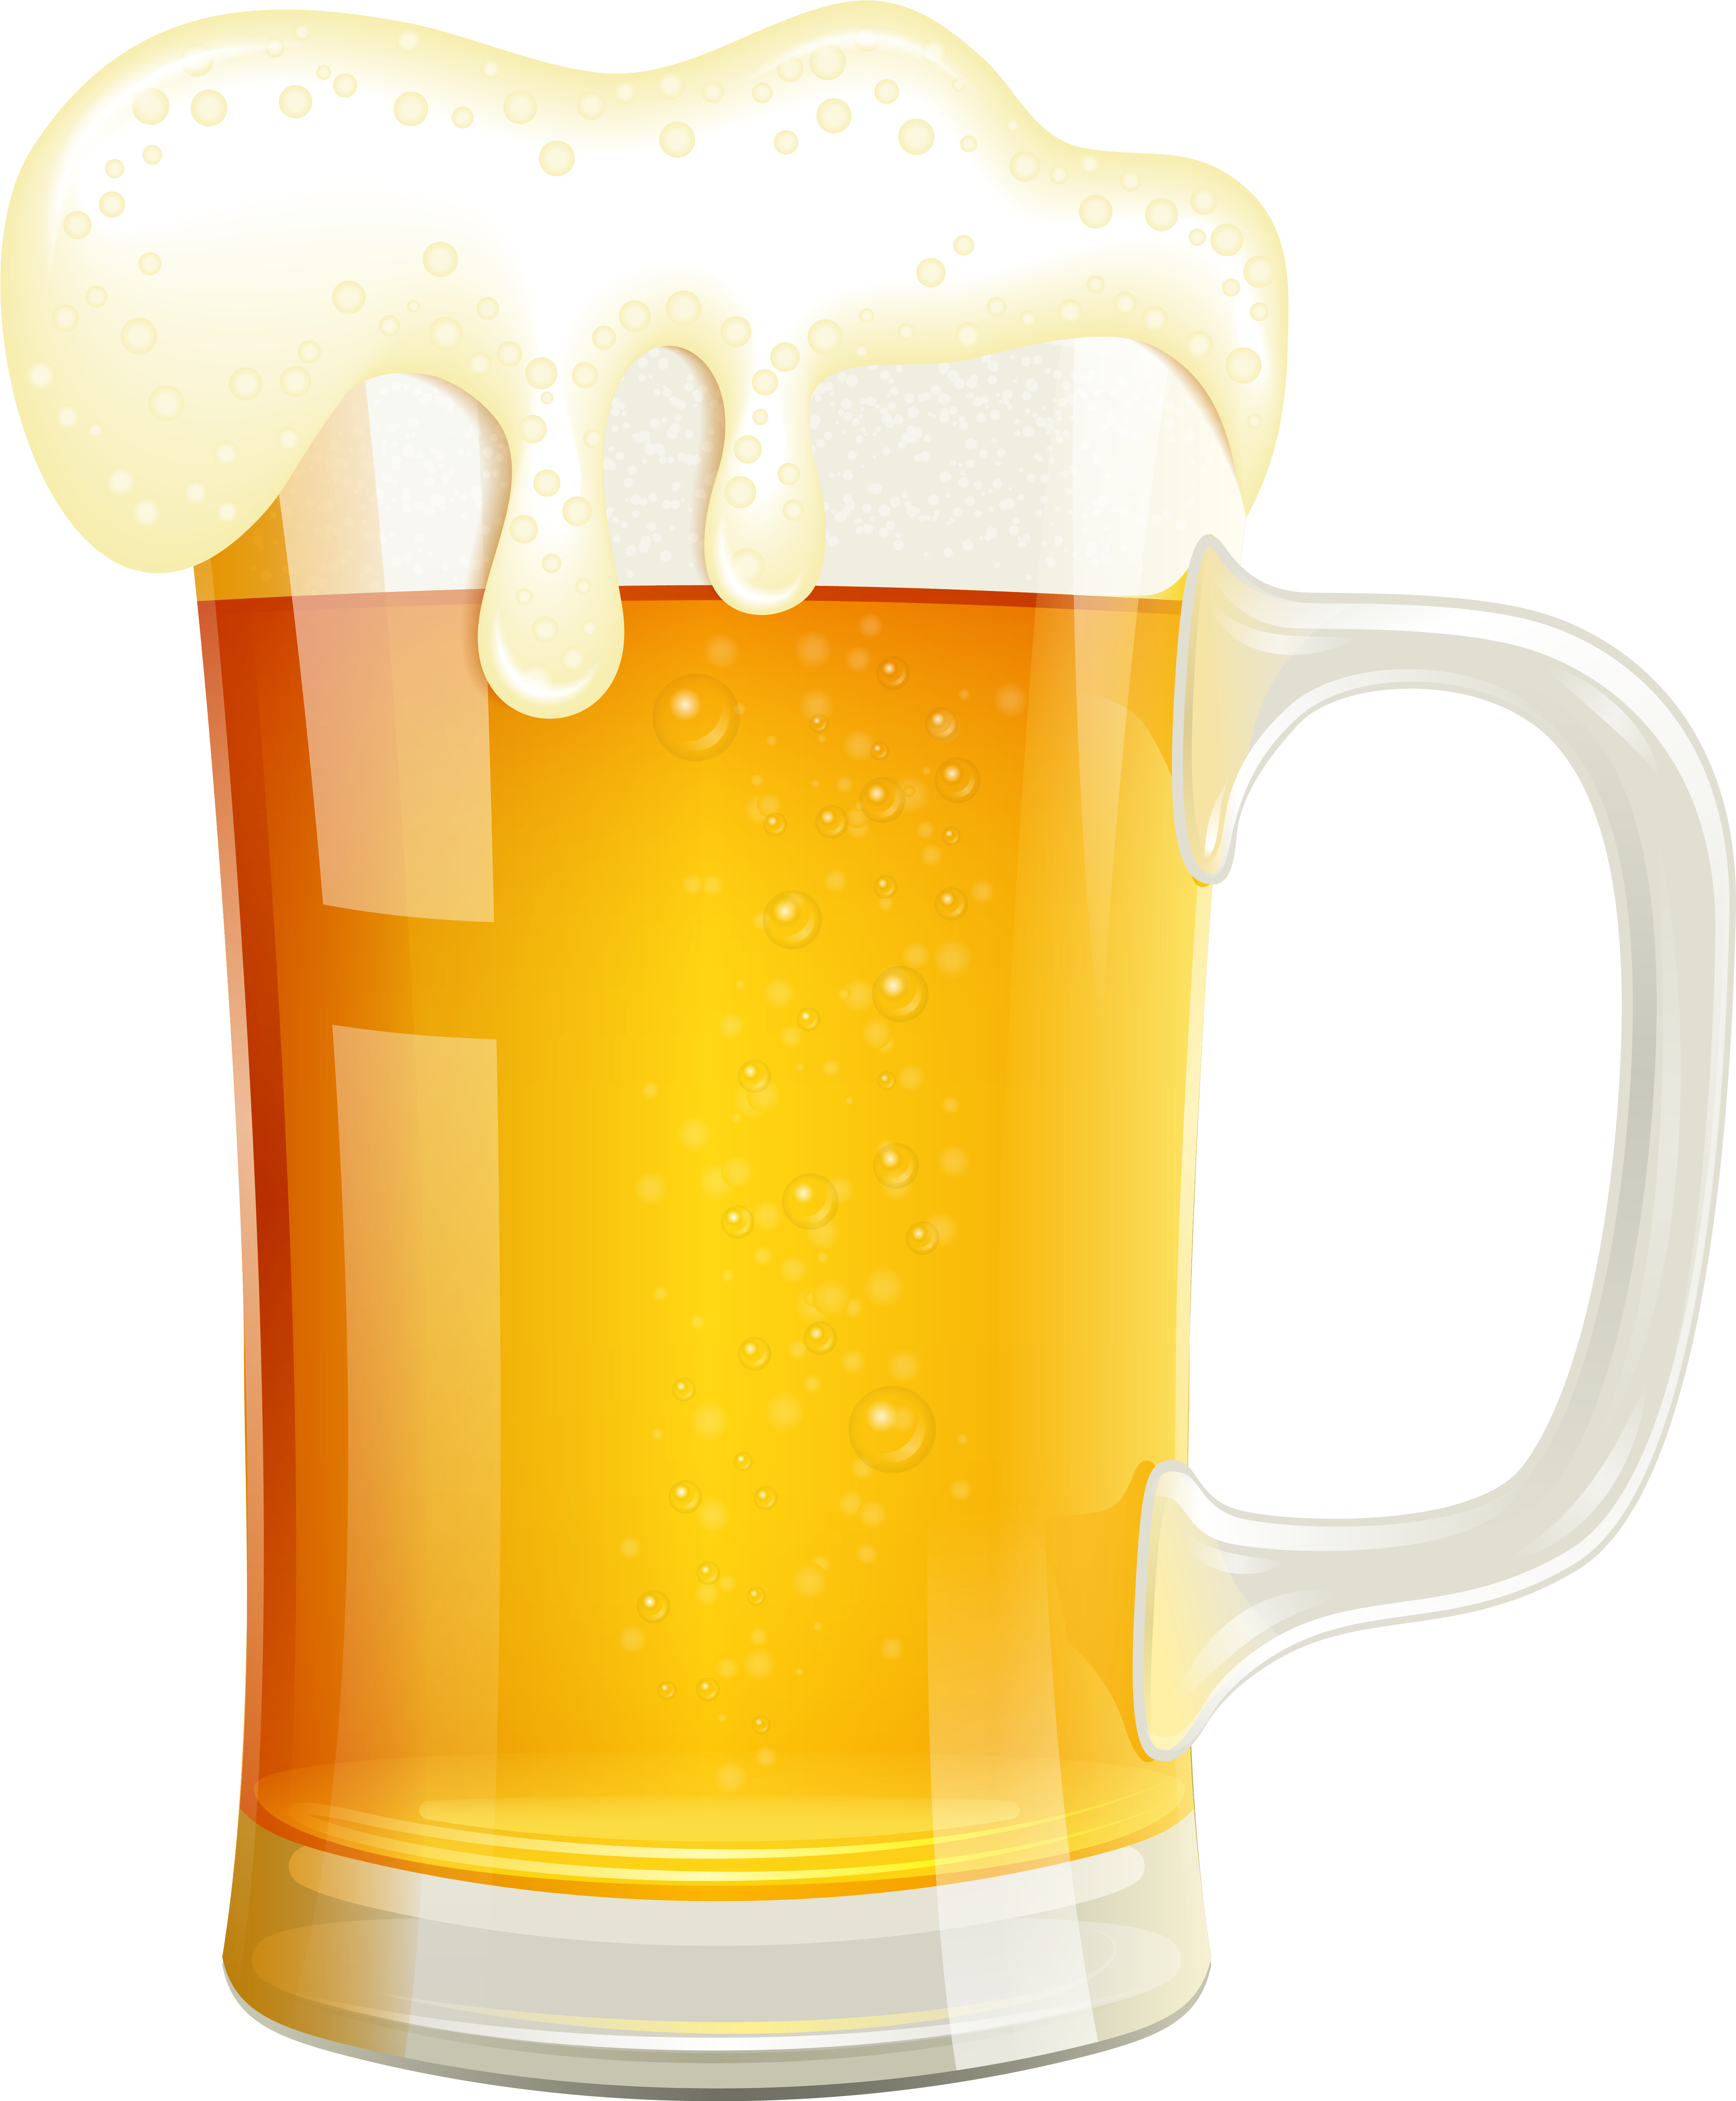 Beer Glass Vector At Collection Of Beer Glass Vector Free For Personal Use 2838